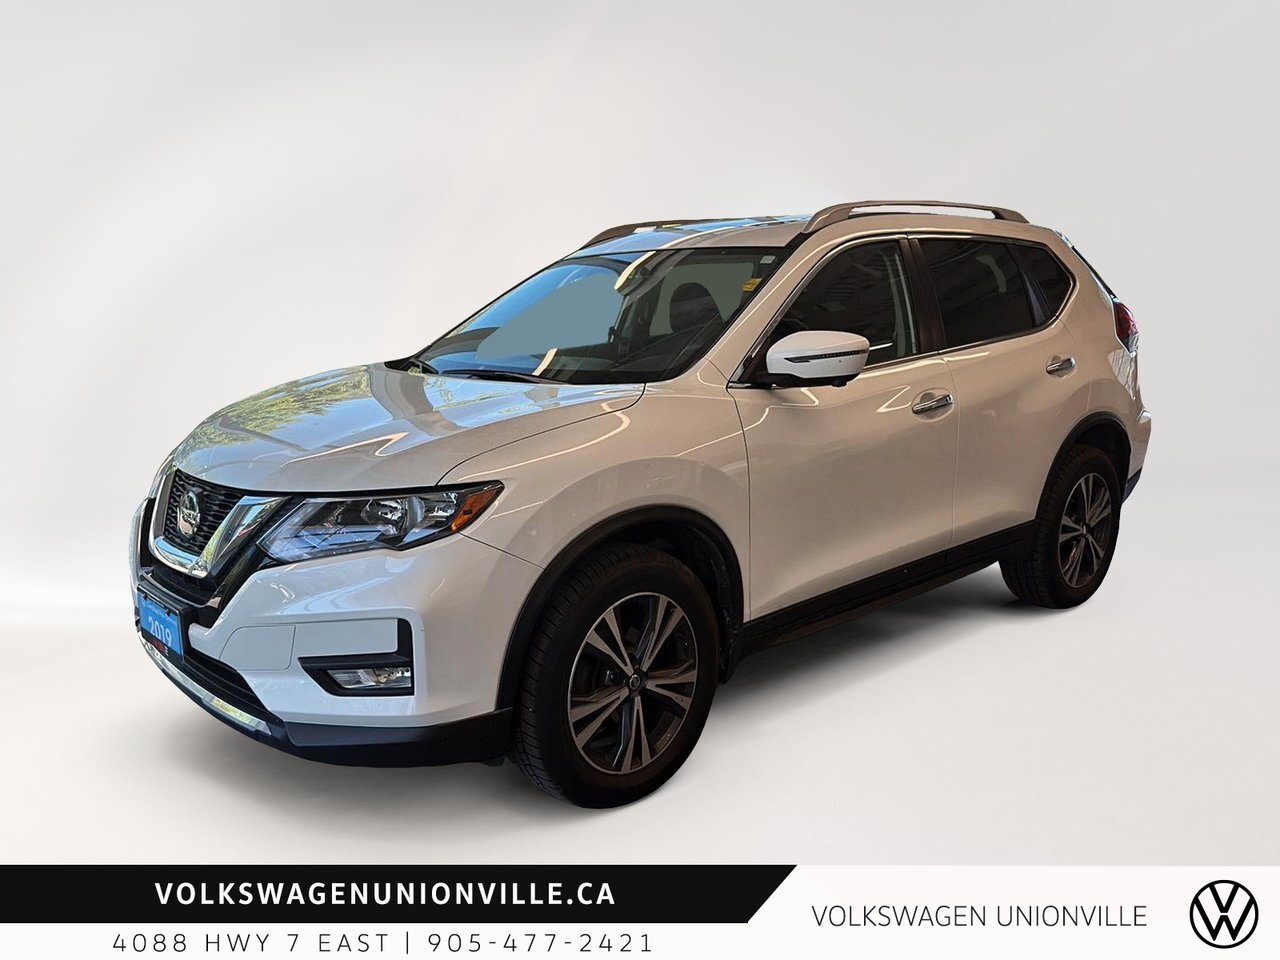 2019 Nissan Rogue Nissan Rogue SV AWD Power Roof Navigation 1 owner